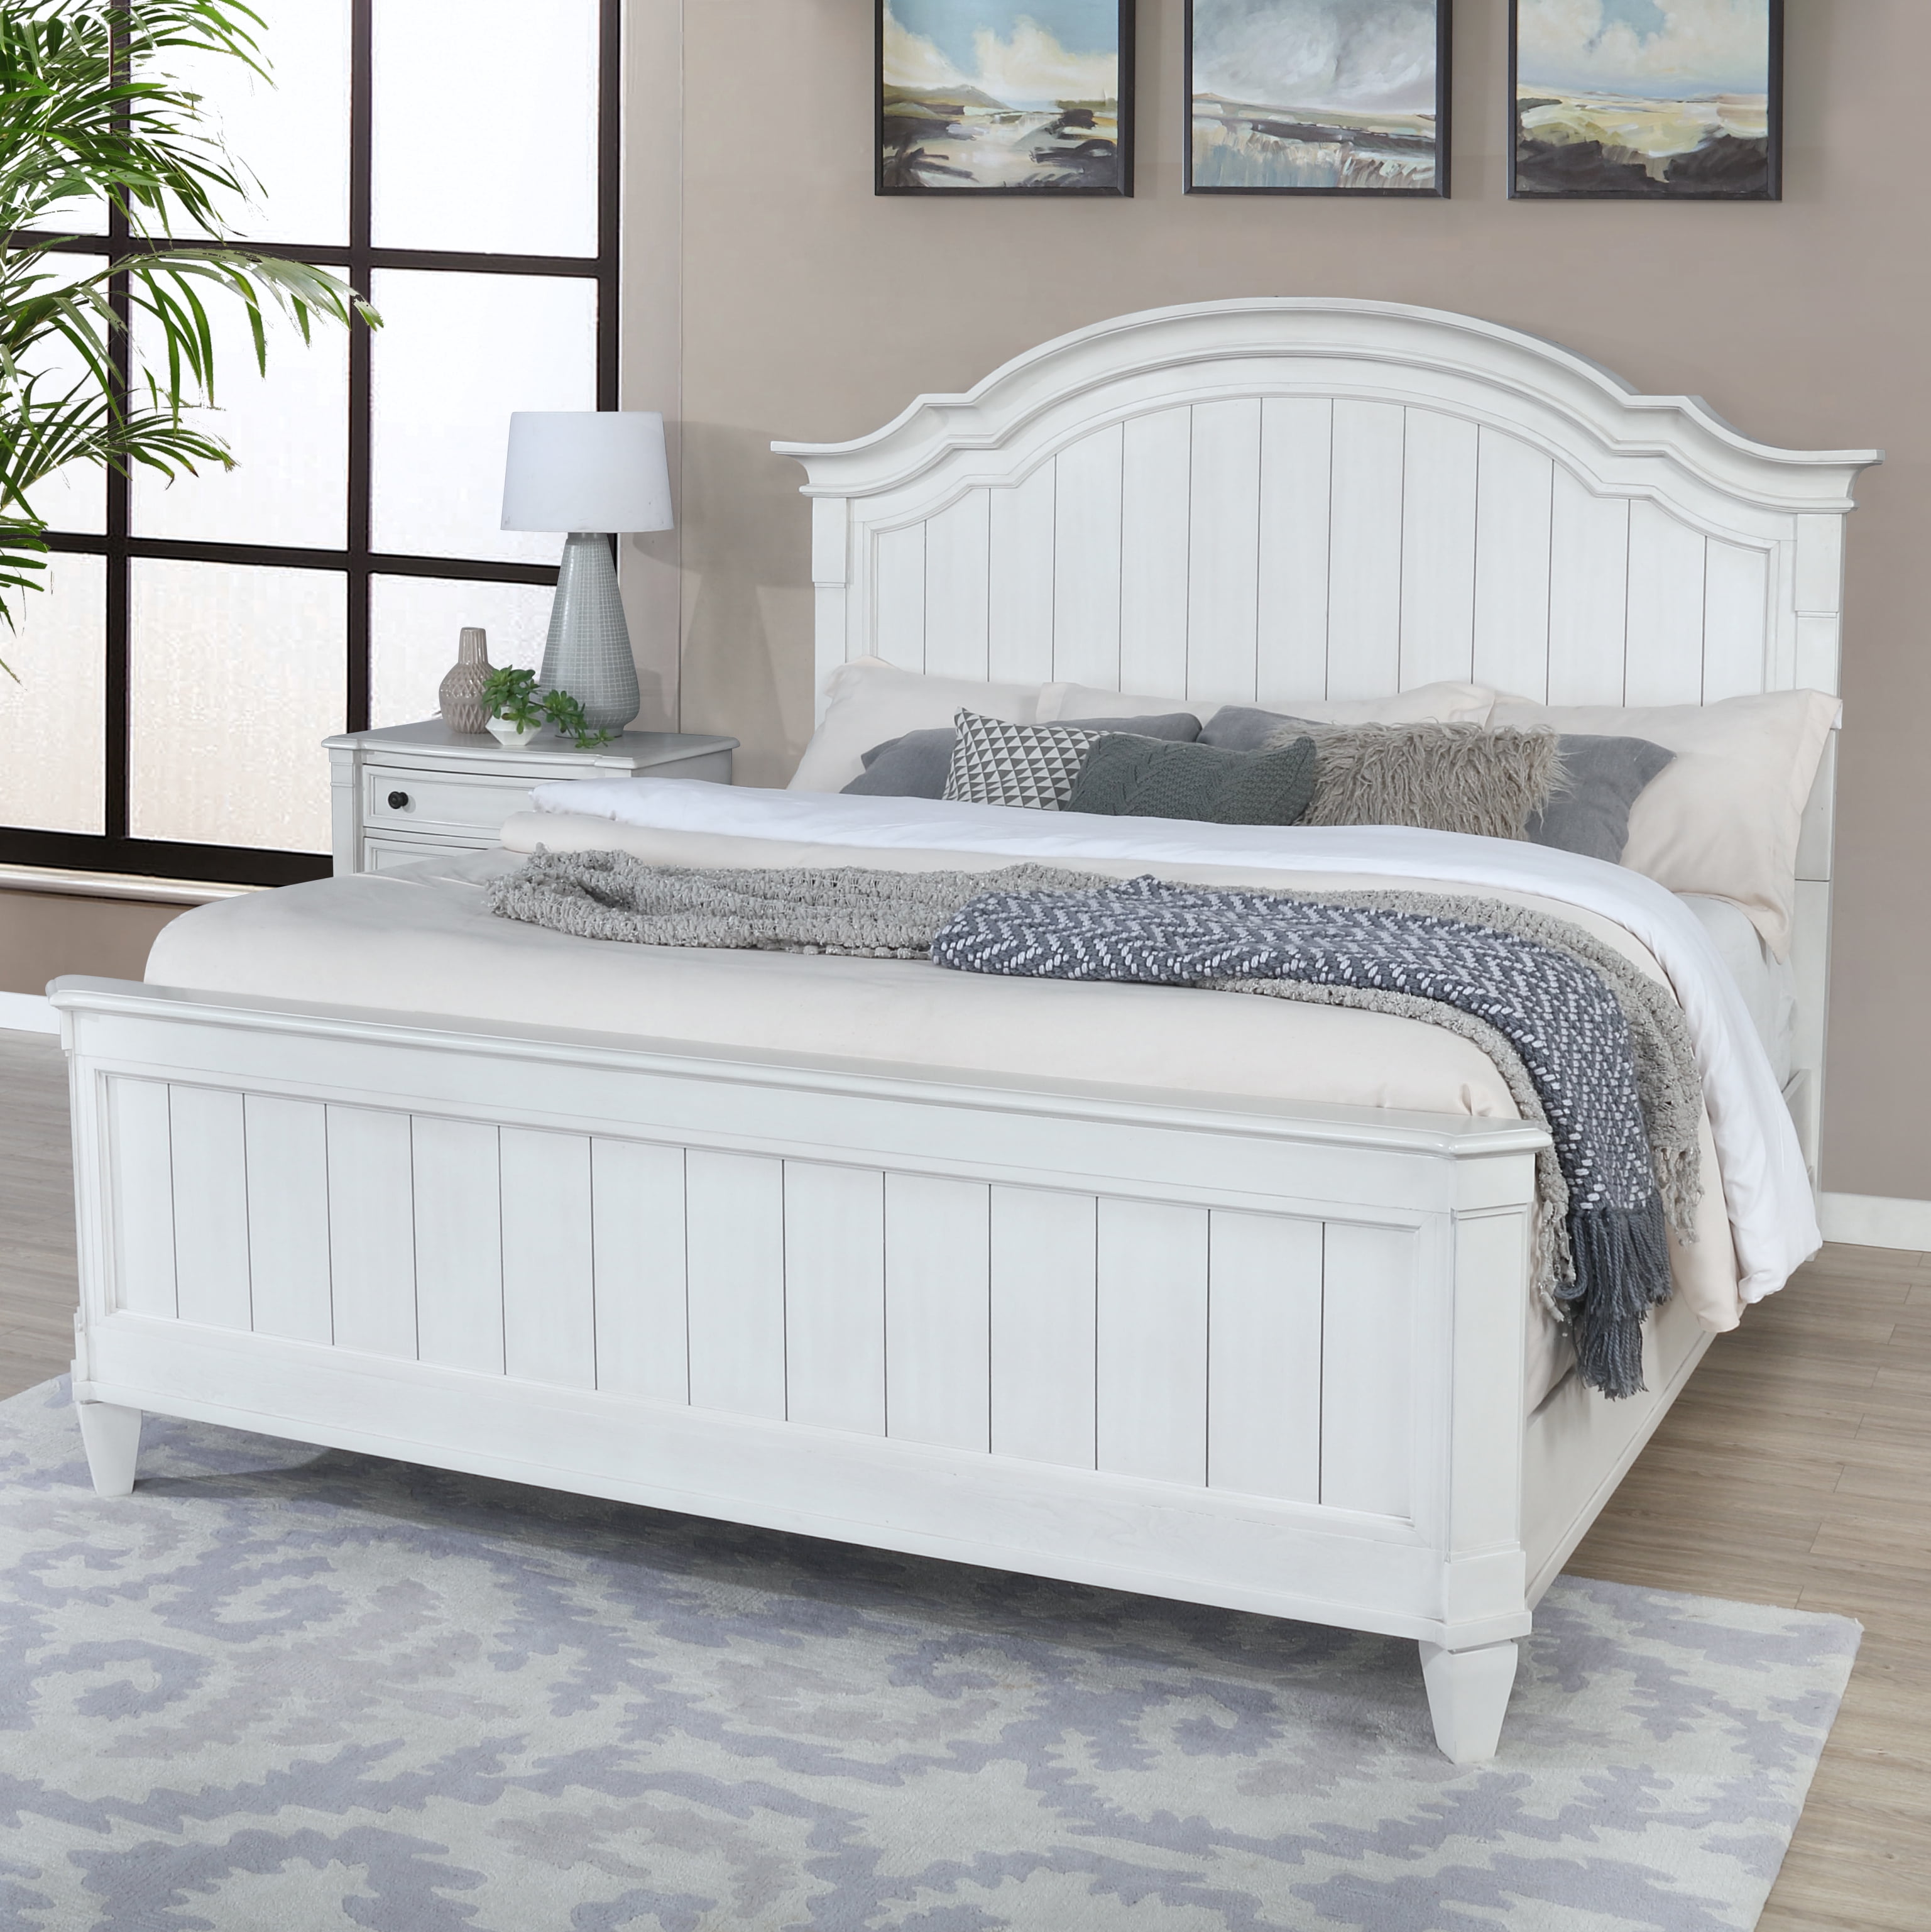 Roundhill Furniture Saline Wood Camelback Planked Bed in White Finish ...